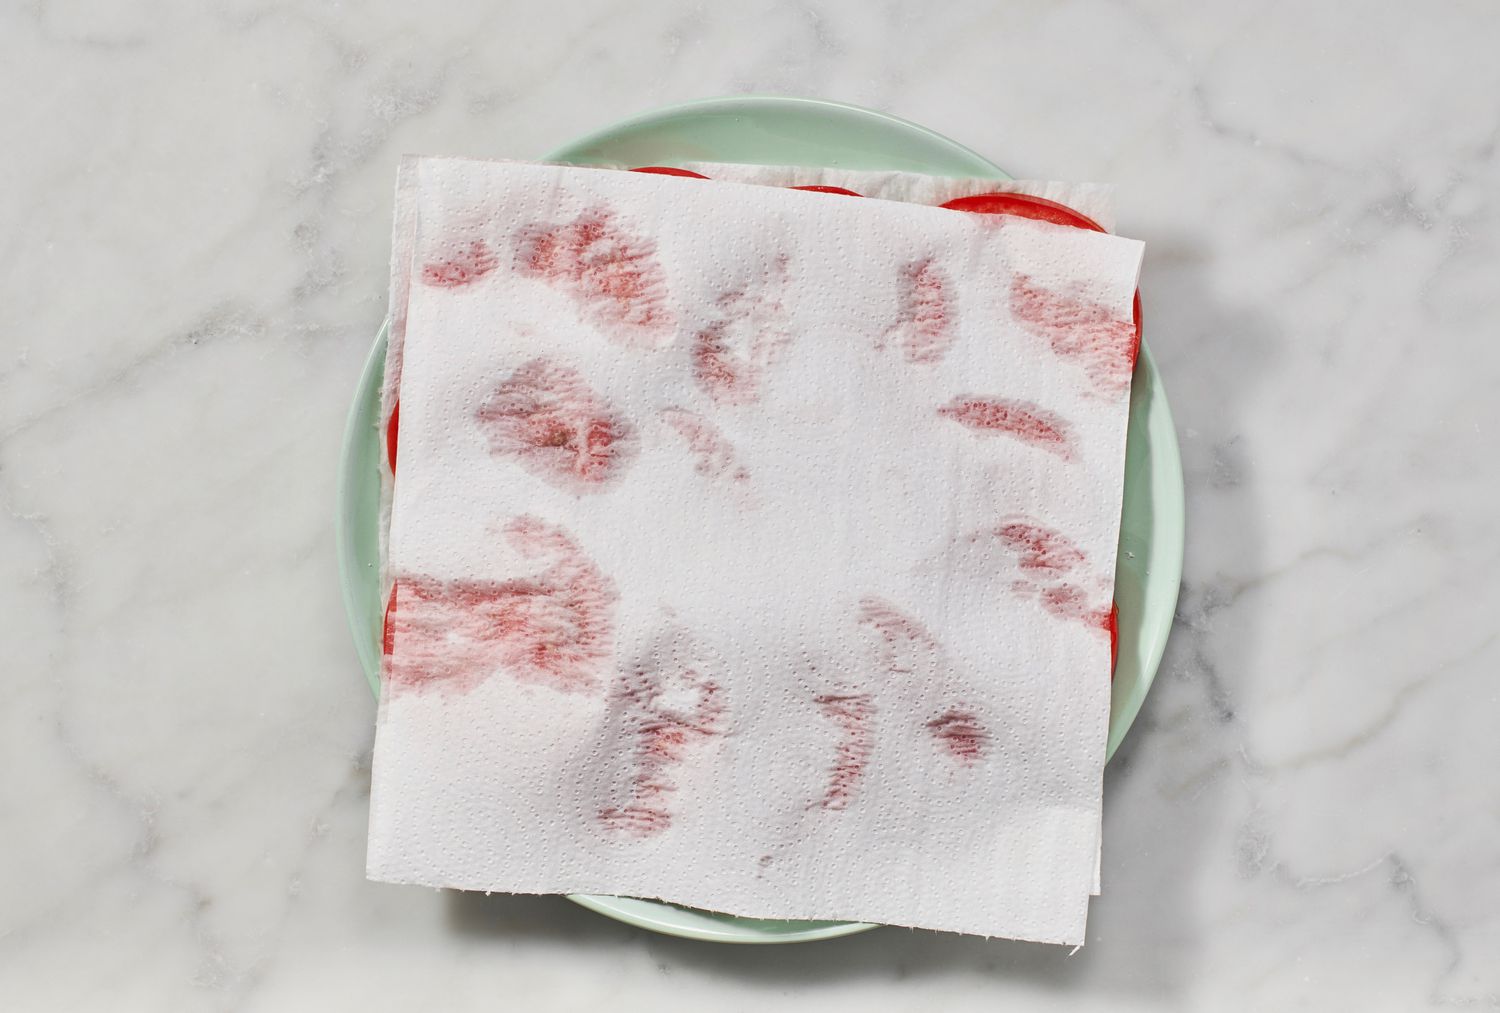 A plate of sliced tomatoes covered in paper towels